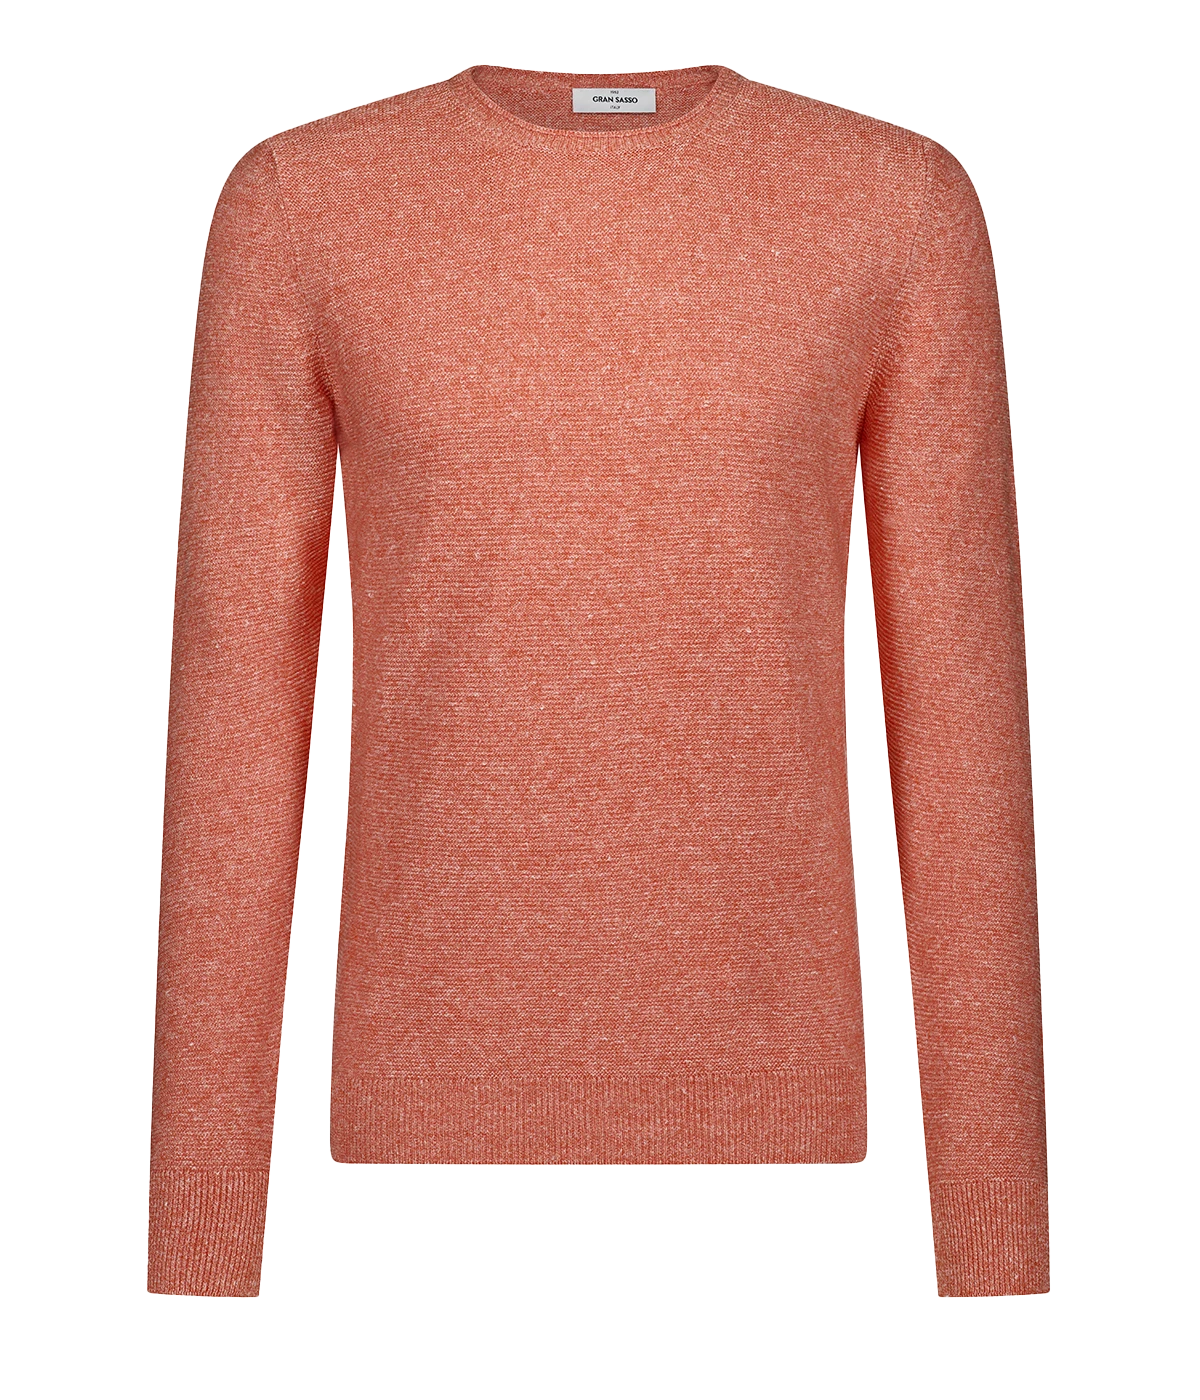 A timeless easy breezy summer crew neck sweater, 100% cotton in a mandarin colourway, featuring crew neckline and long sleeves. Throw on and go, comfortable, lightweight, made in Italy. 